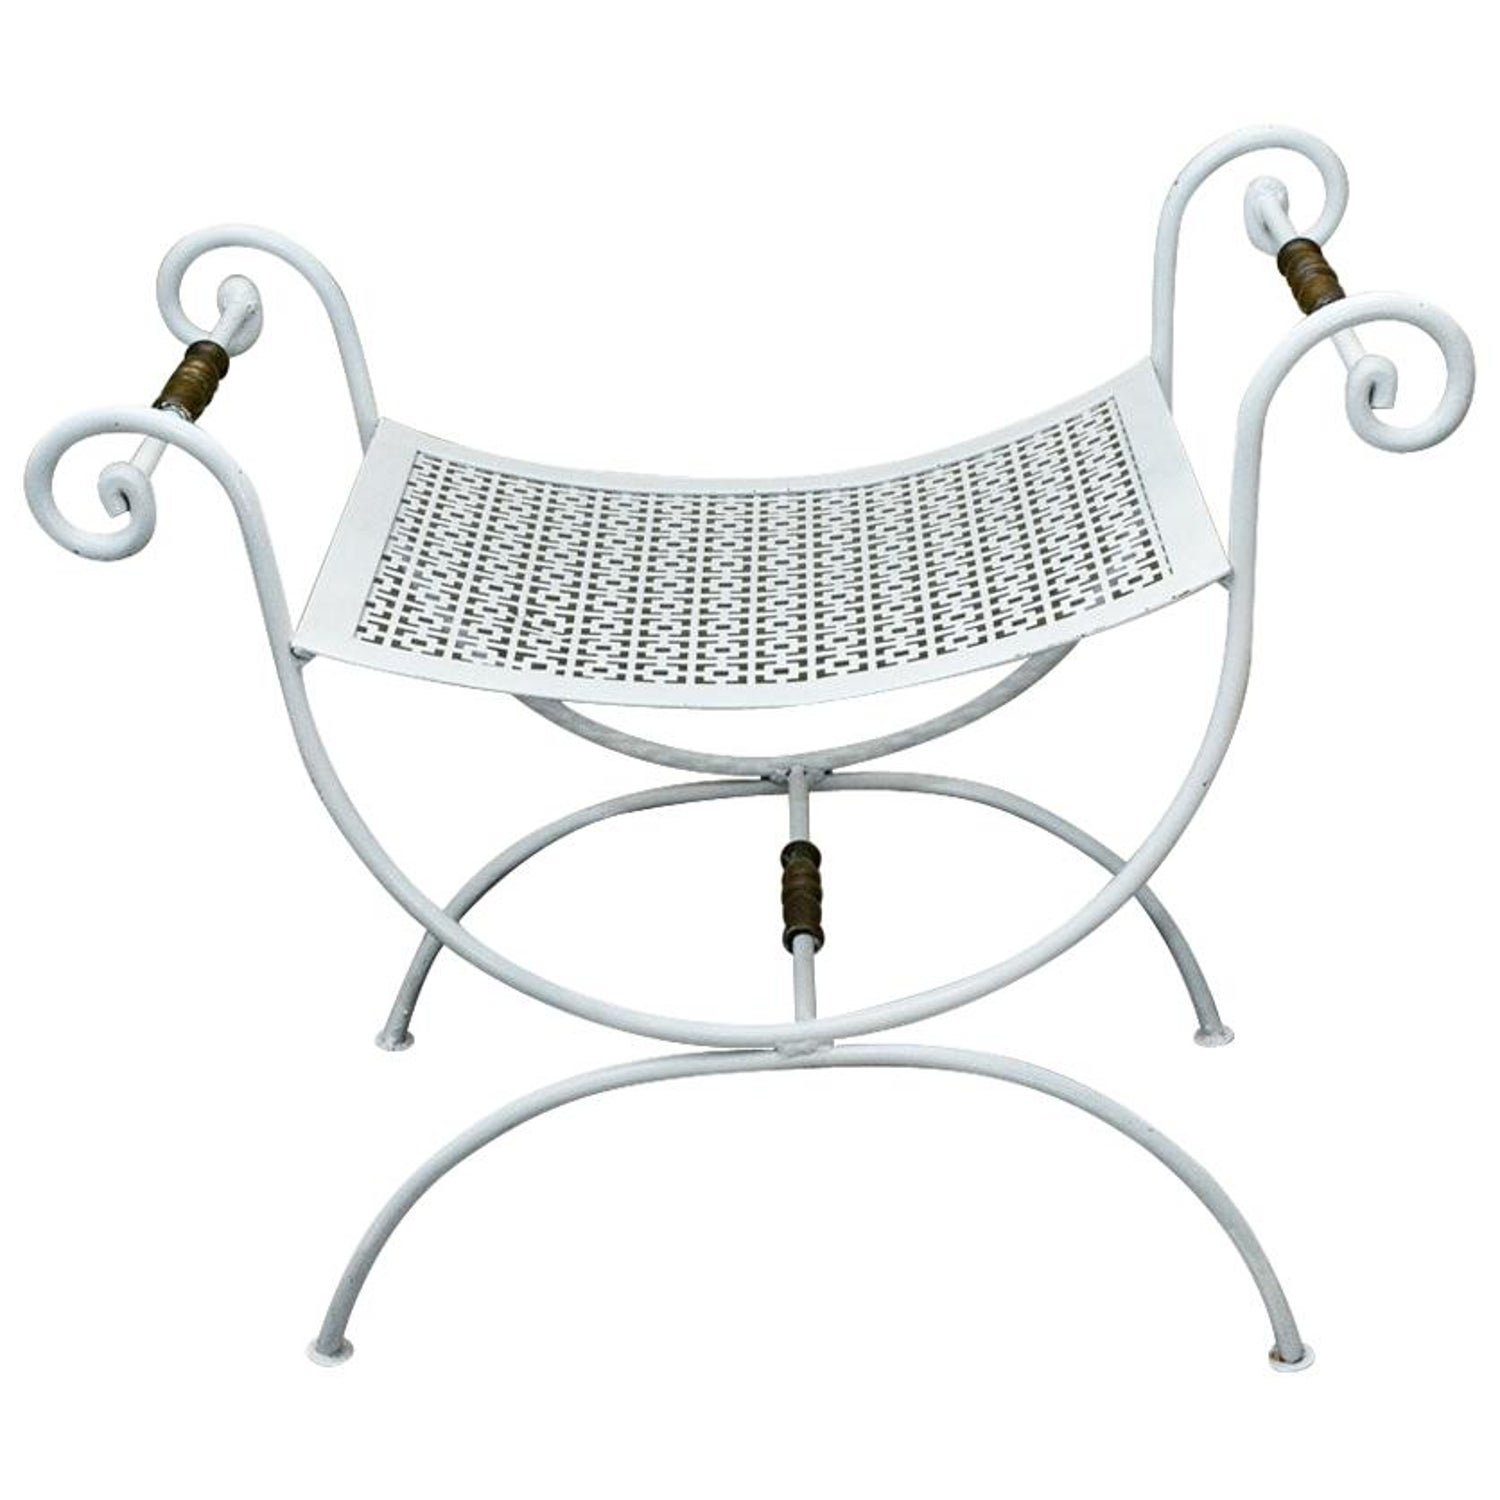 Wrought Iron Vanity Stool Or Bench, Wrought Iron Vanity Chair